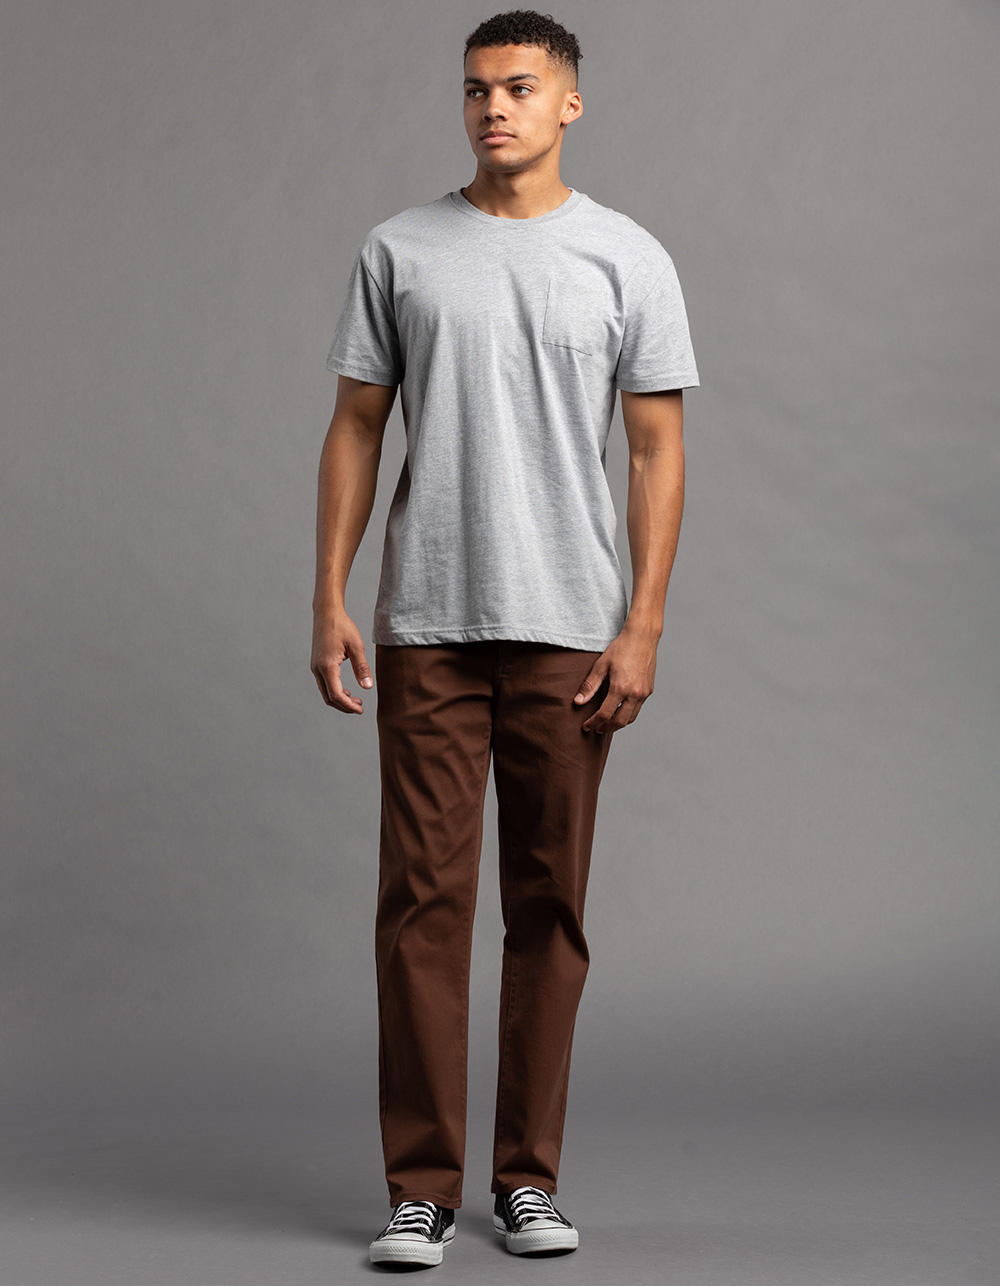 RSQ Mens Straight Chino Pants - BROWN | Tillys